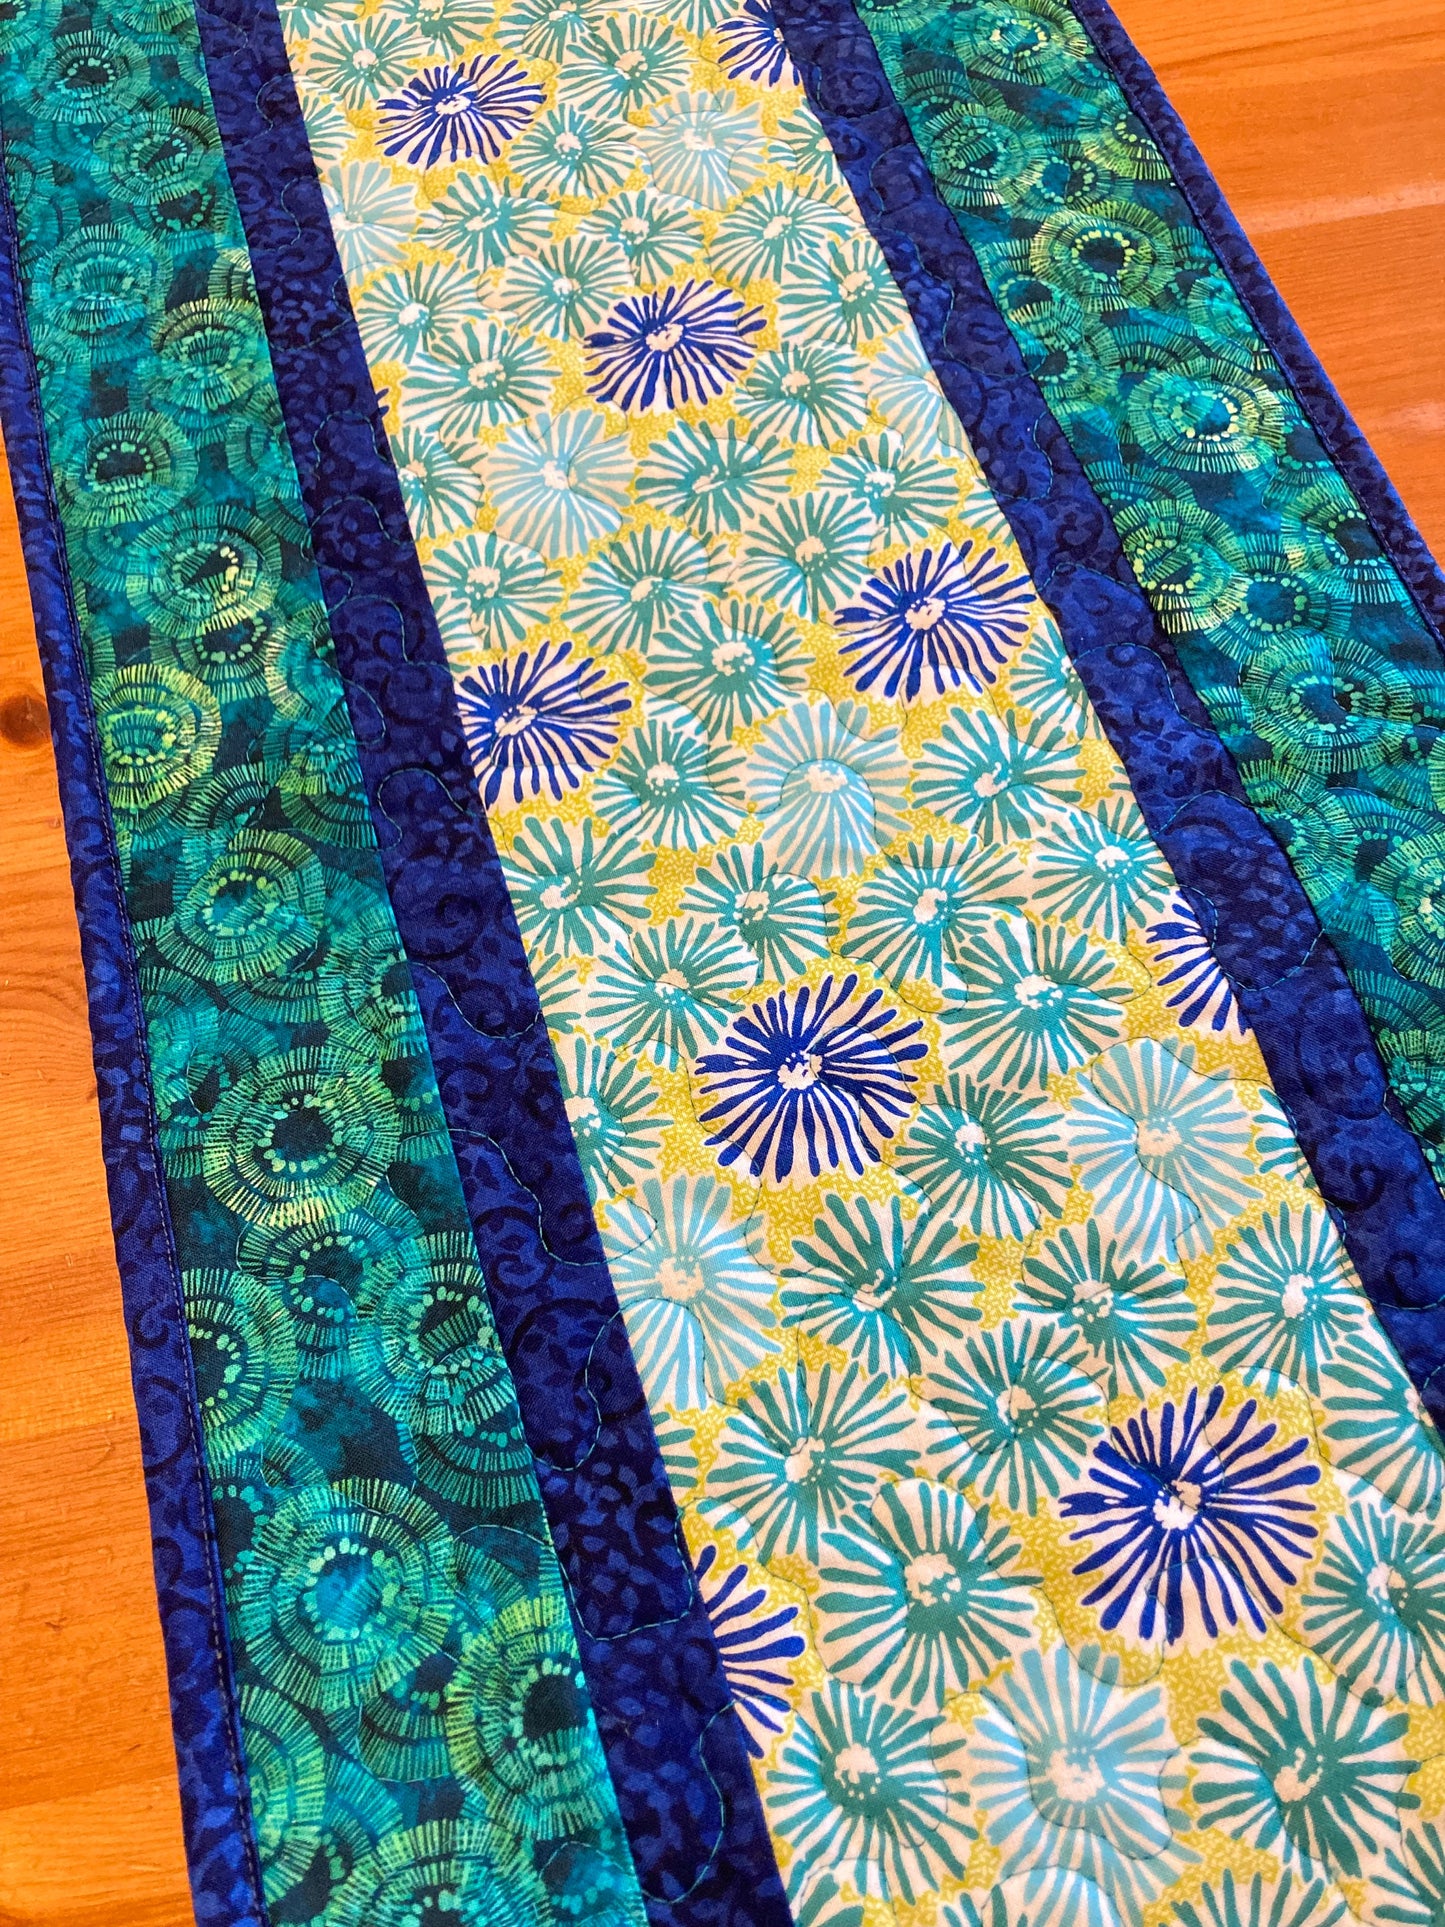 Blue Green Abstract Quilted Table Runner, Dining Room Coffee Table, Reversible 13x48" End Table Nightstand Everyday Handmade Bed Dresser